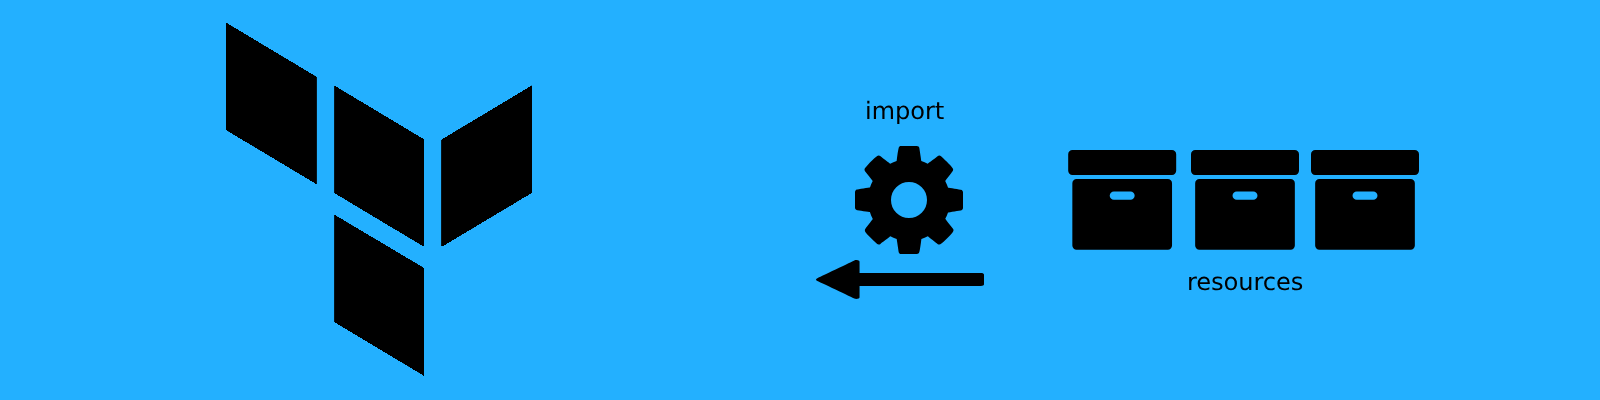 Importing resources with Terraform before and after Terraform 1.5